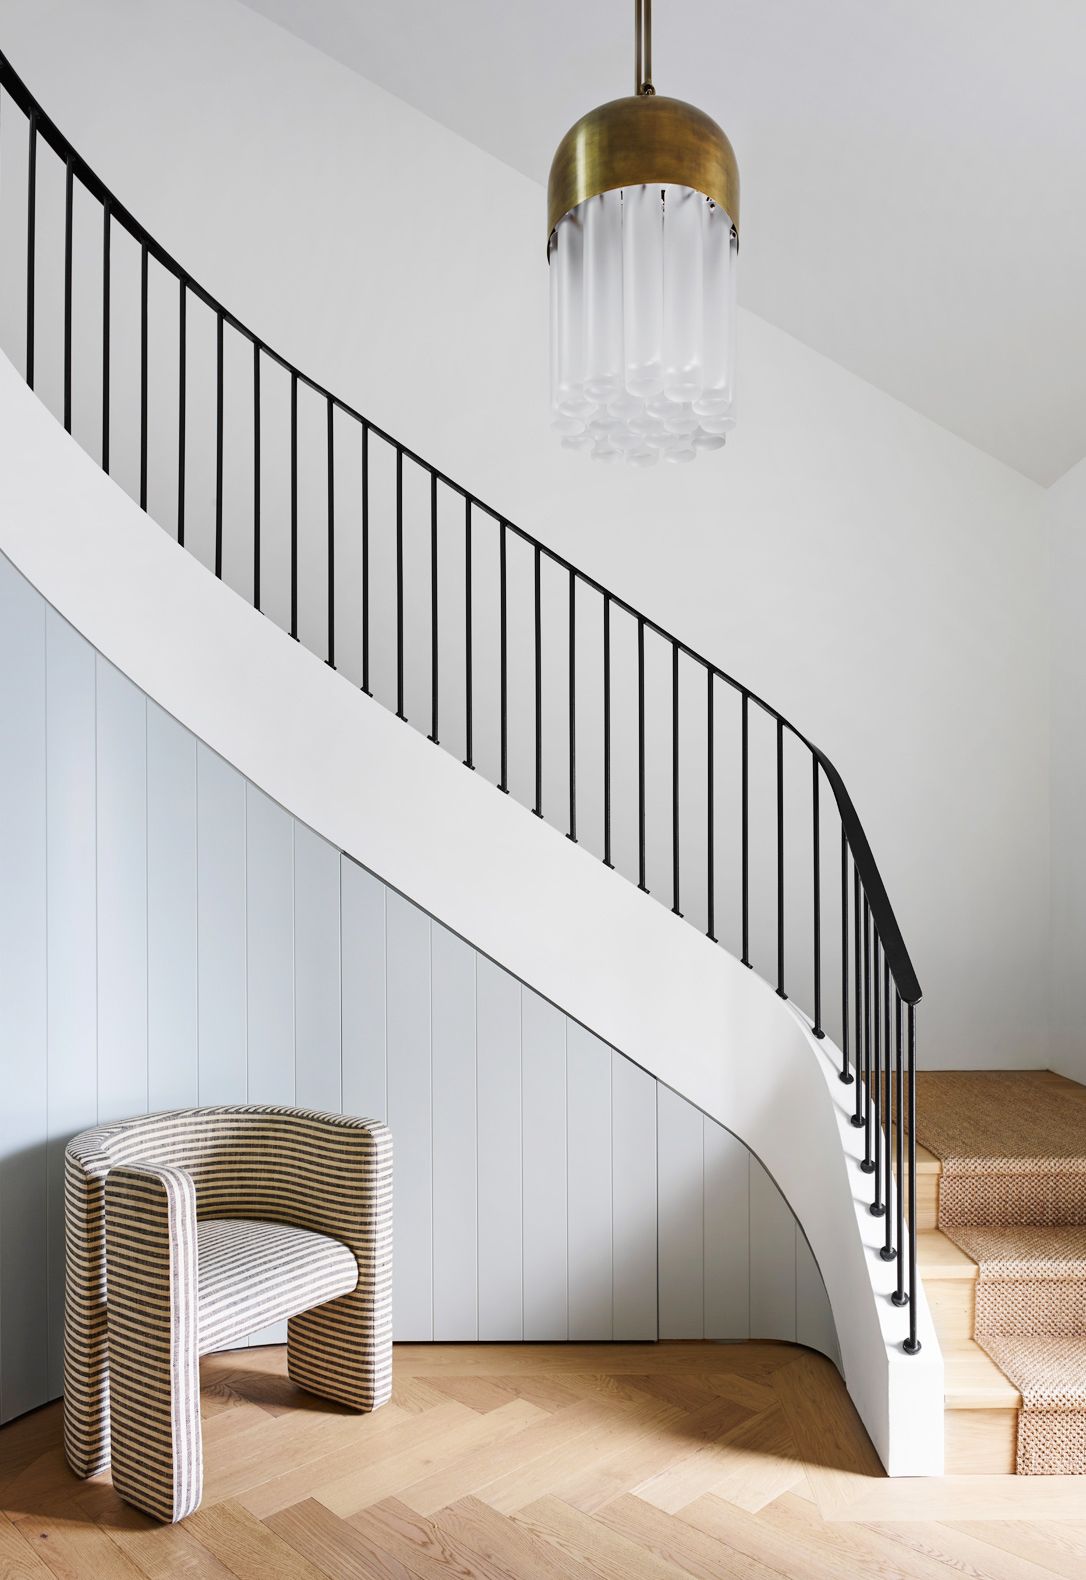 25 Unique Stair Designs - Beautiful Stair Ideas for Your House